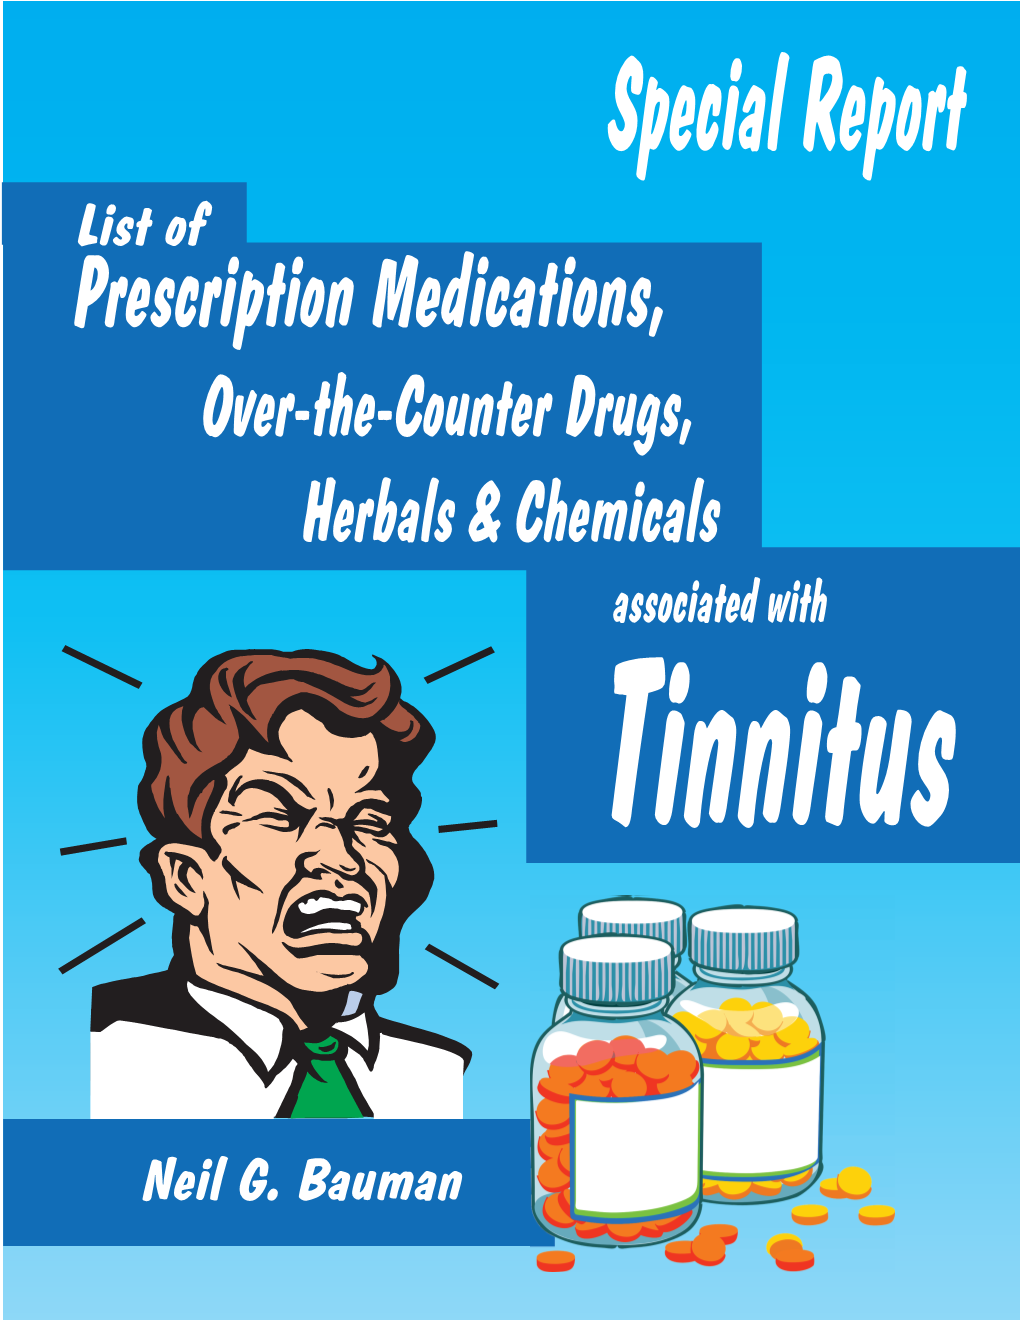 Prescription Medications, Over-The-Counter Drugs, Herbs & Chemicals Associated with Tinnitus